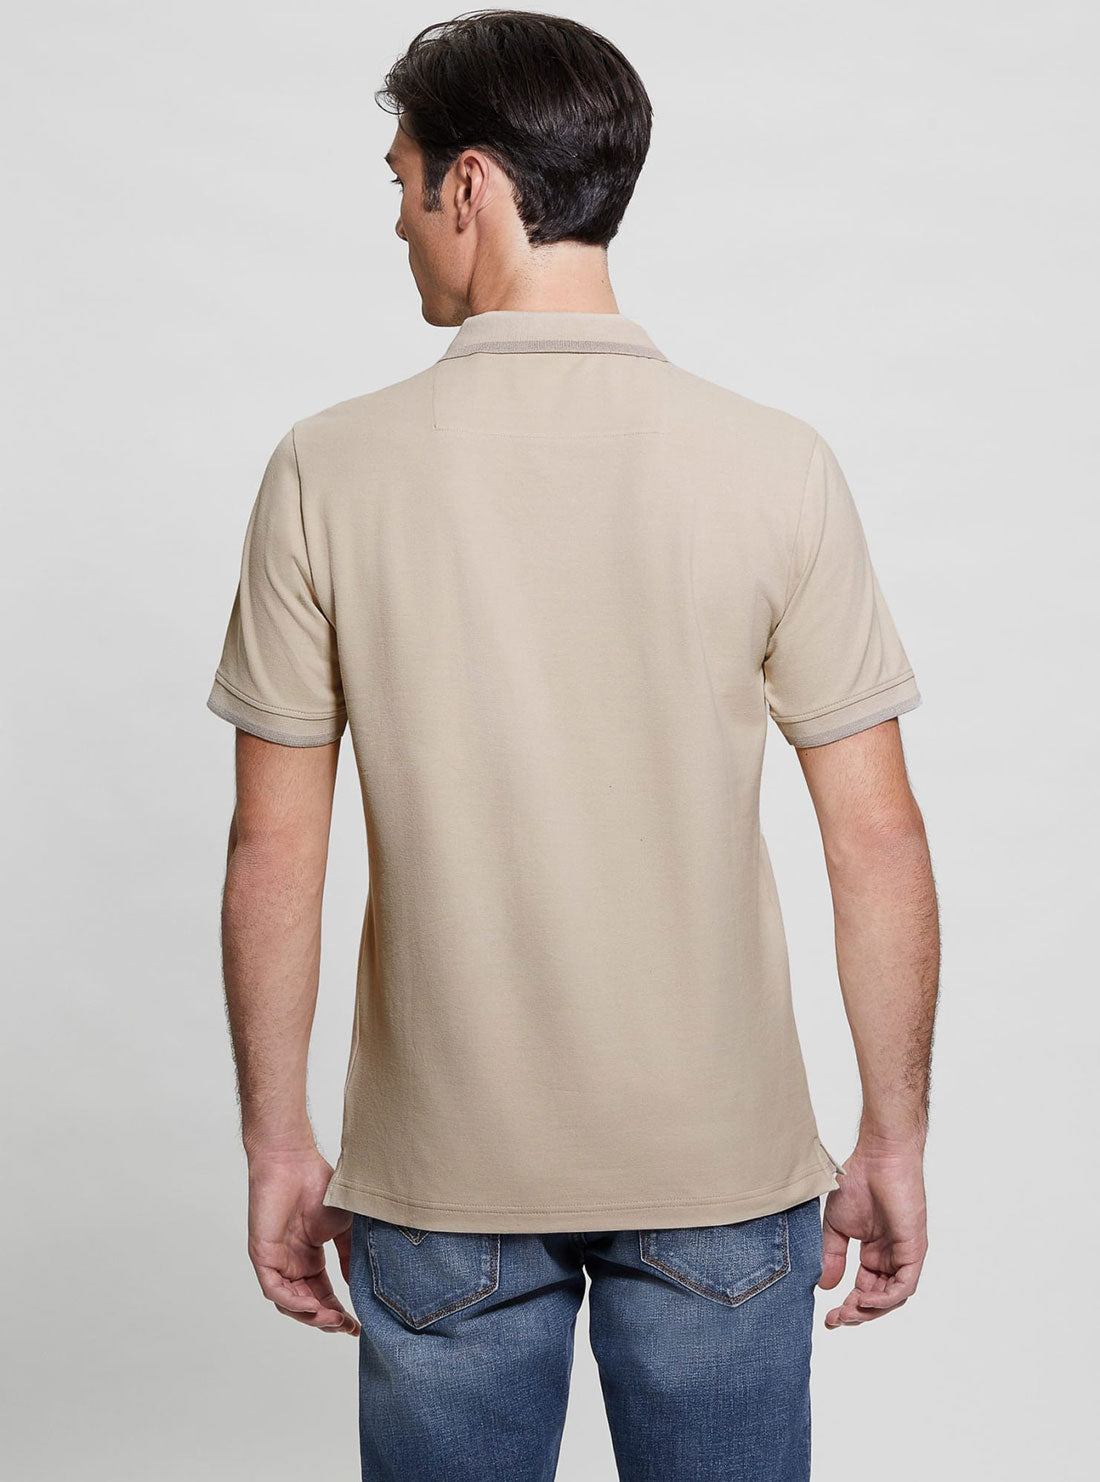 GUESS Beige Lyle Short Sleeve Polo T-Shirt back view